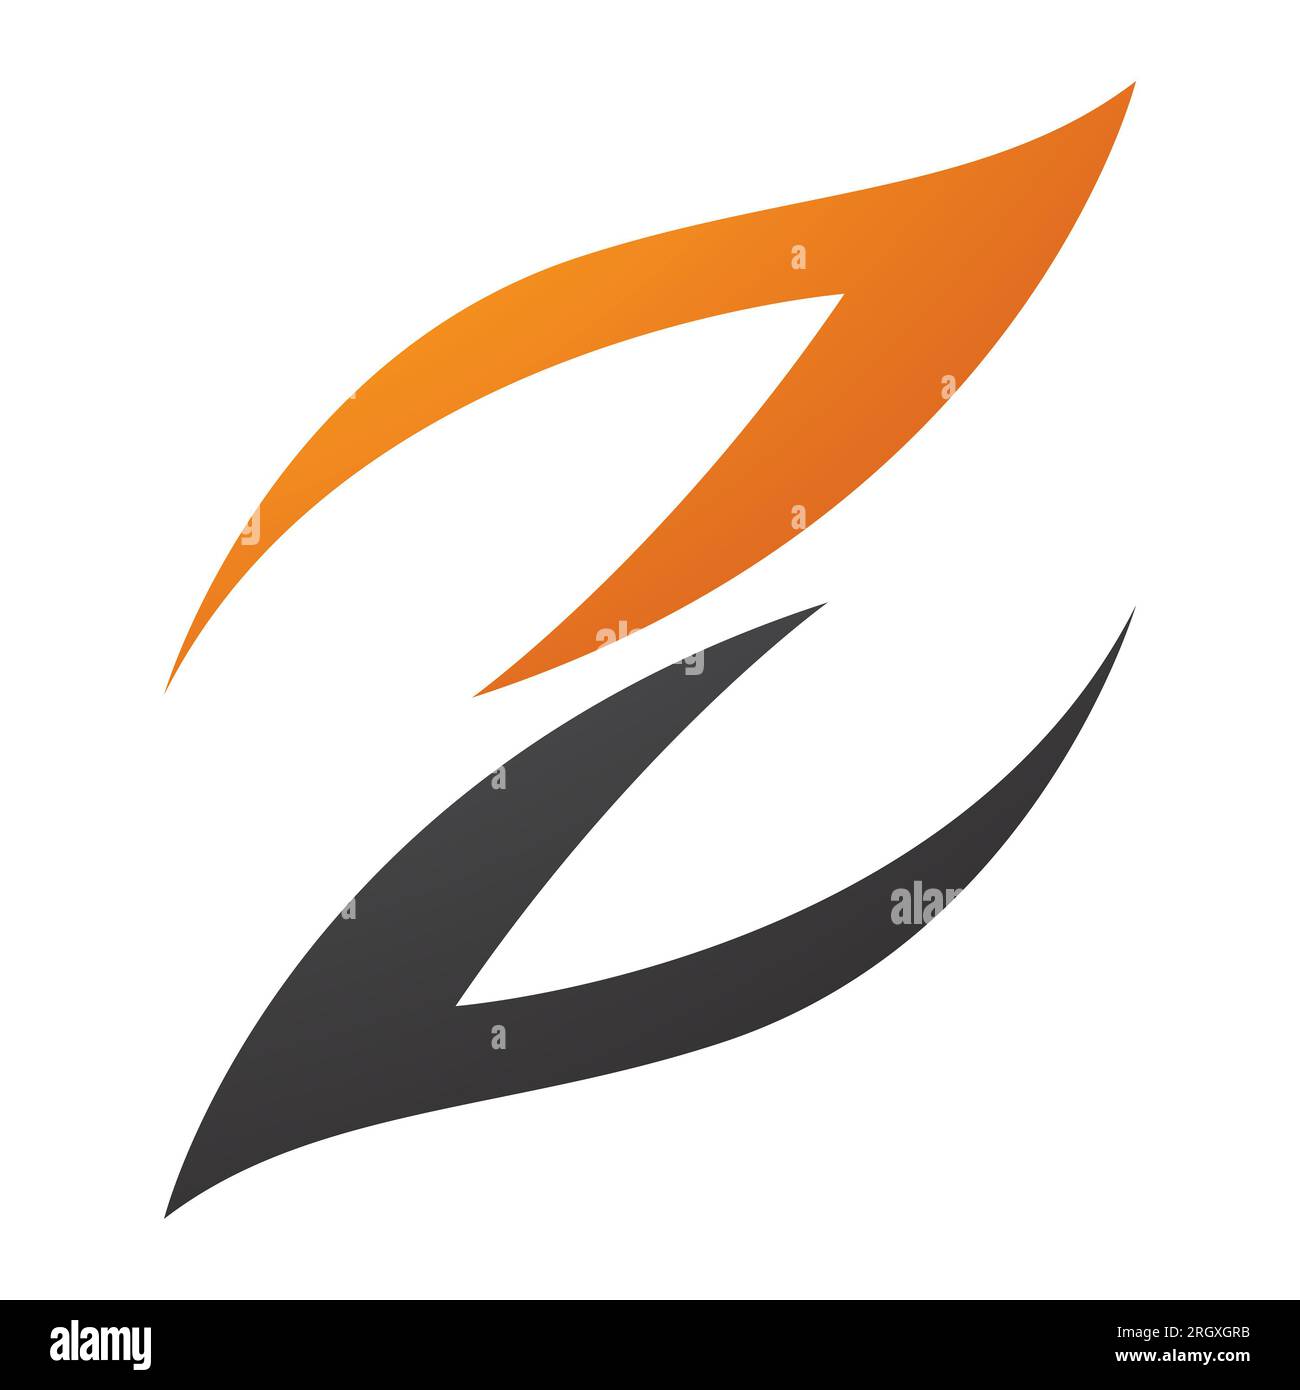 Orange and Black Fire Shaped Letter Z Icon on a White Background Stock Photo